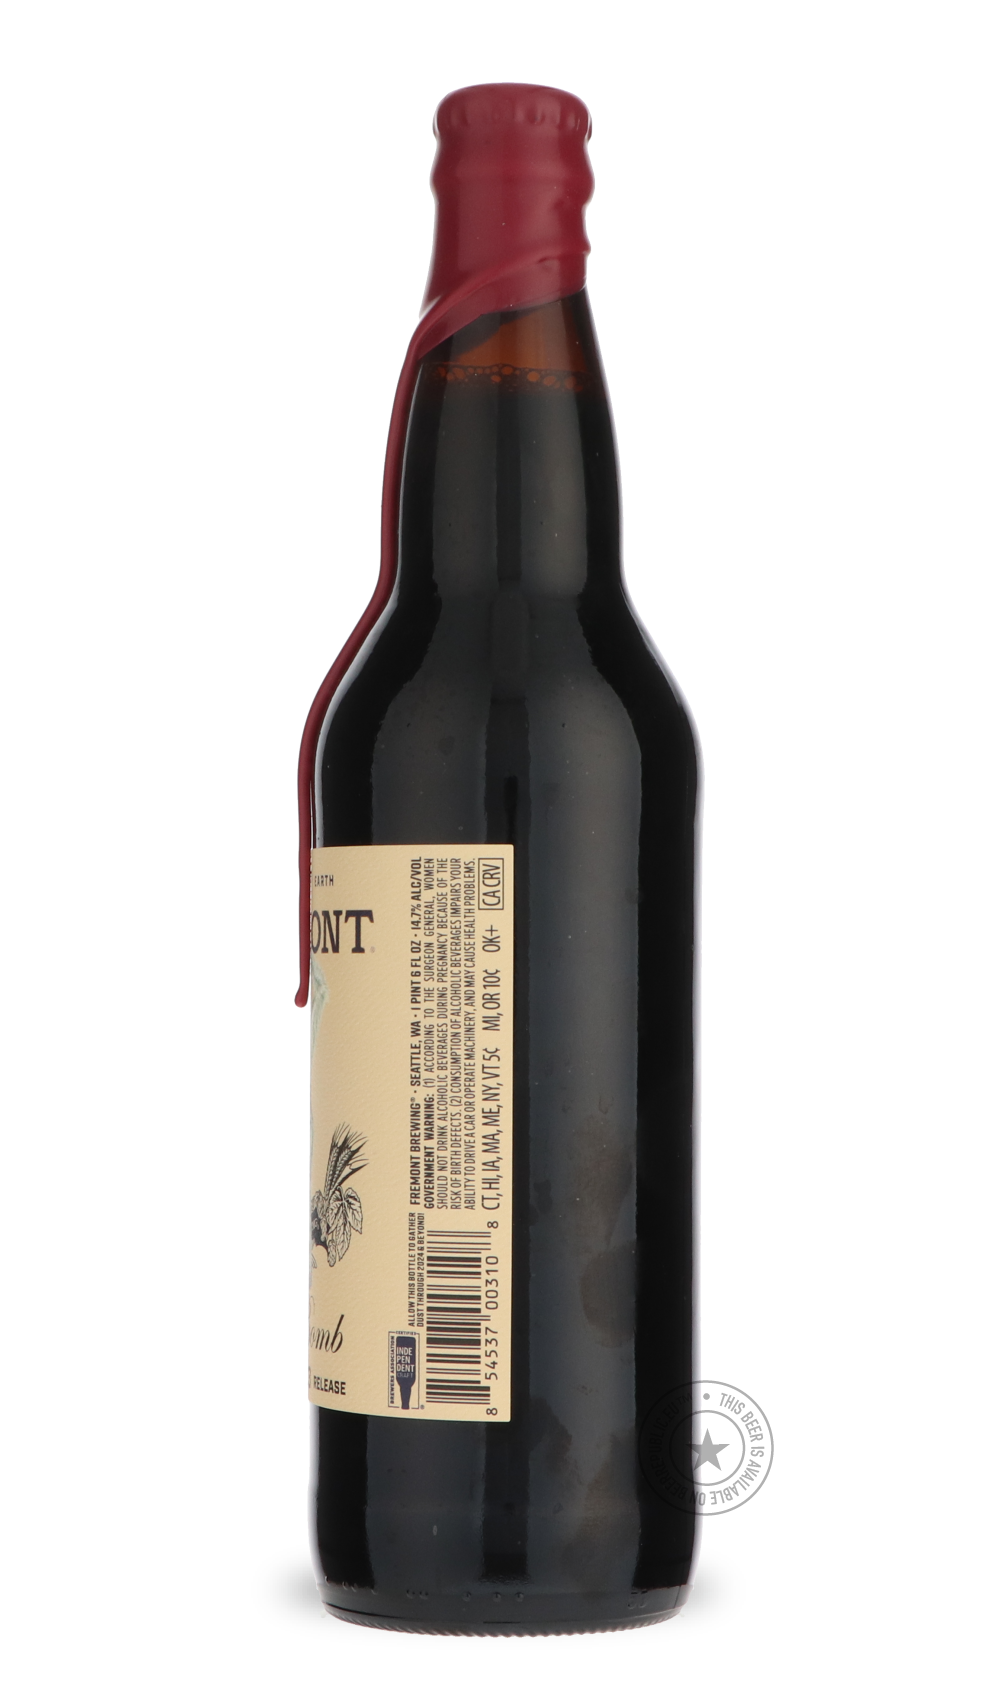 -Fremont- B-Bomb 2023-Brown & Dark- Only @ Beer Republic - The best online beer store for American & Canadian craft beer - Buy beer online from the USA and Canada - Bier online kopen - Amerikaans bier kopen - Craft beer store - Craft beer kopen - Amerikanisch bier kaufen - Bier online kaufen - Acheter biere online - IPA - Stout - Porter - New England IPA - Hazy IPA - Imperial Stout - Barrel Aged - Barrel Aged Imperial Stout - Brown - Dark beer - Blond - Blonde - Pilsner - Lager - Wheat - Weizen - Amber - Ba